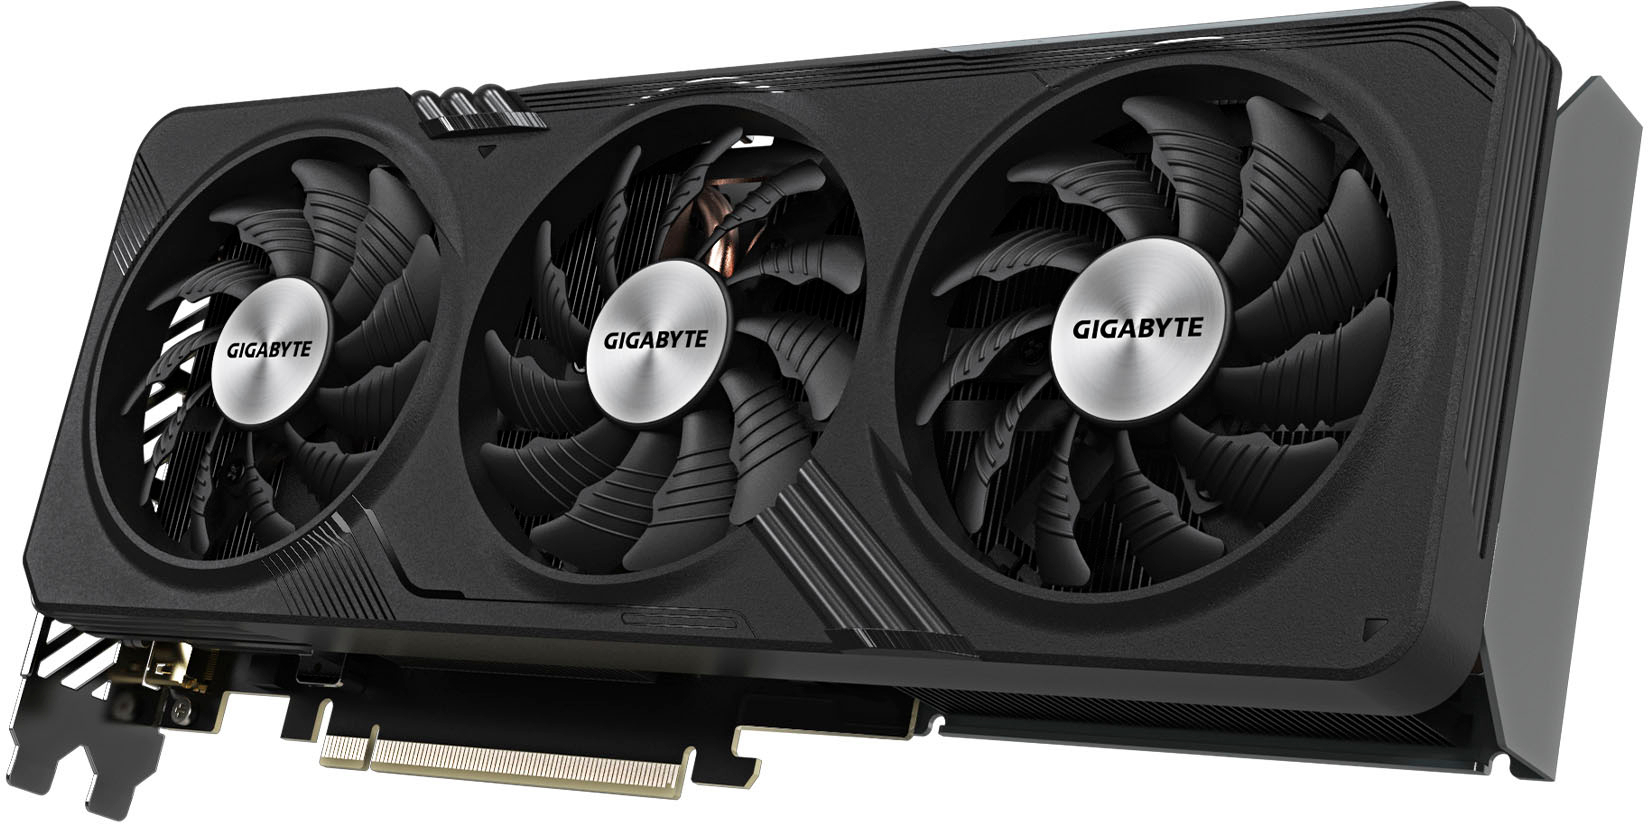 Win 1 of 460 GeForce RTX 4060 & 4060 Ti Graphics Cards In Our $150,000  Summer of #RTXON Sweepstakes, GeForce News